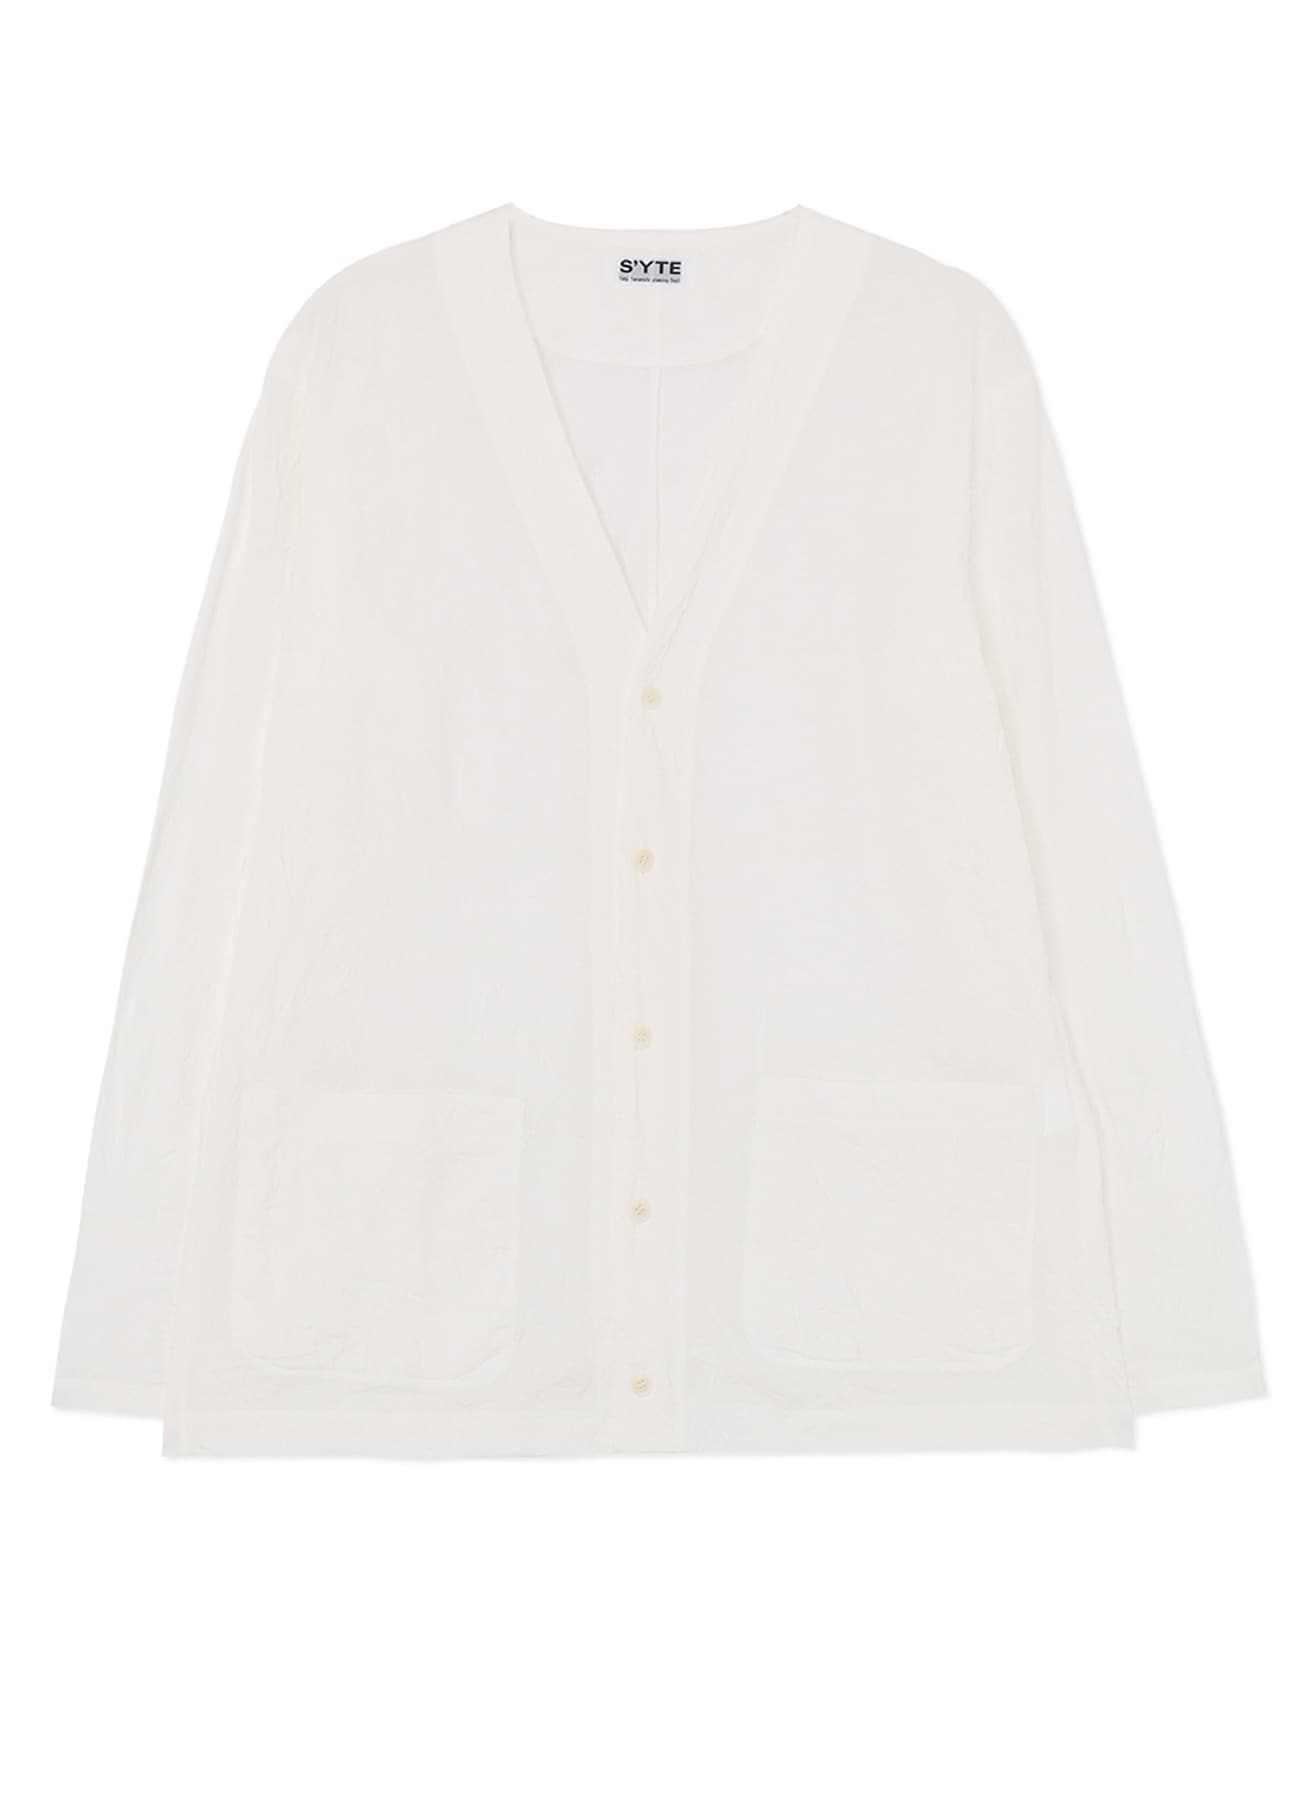 CATCH-WASHER FINISH COTTON JERSEY CARDIGAN(M White): S'YTE｜THE